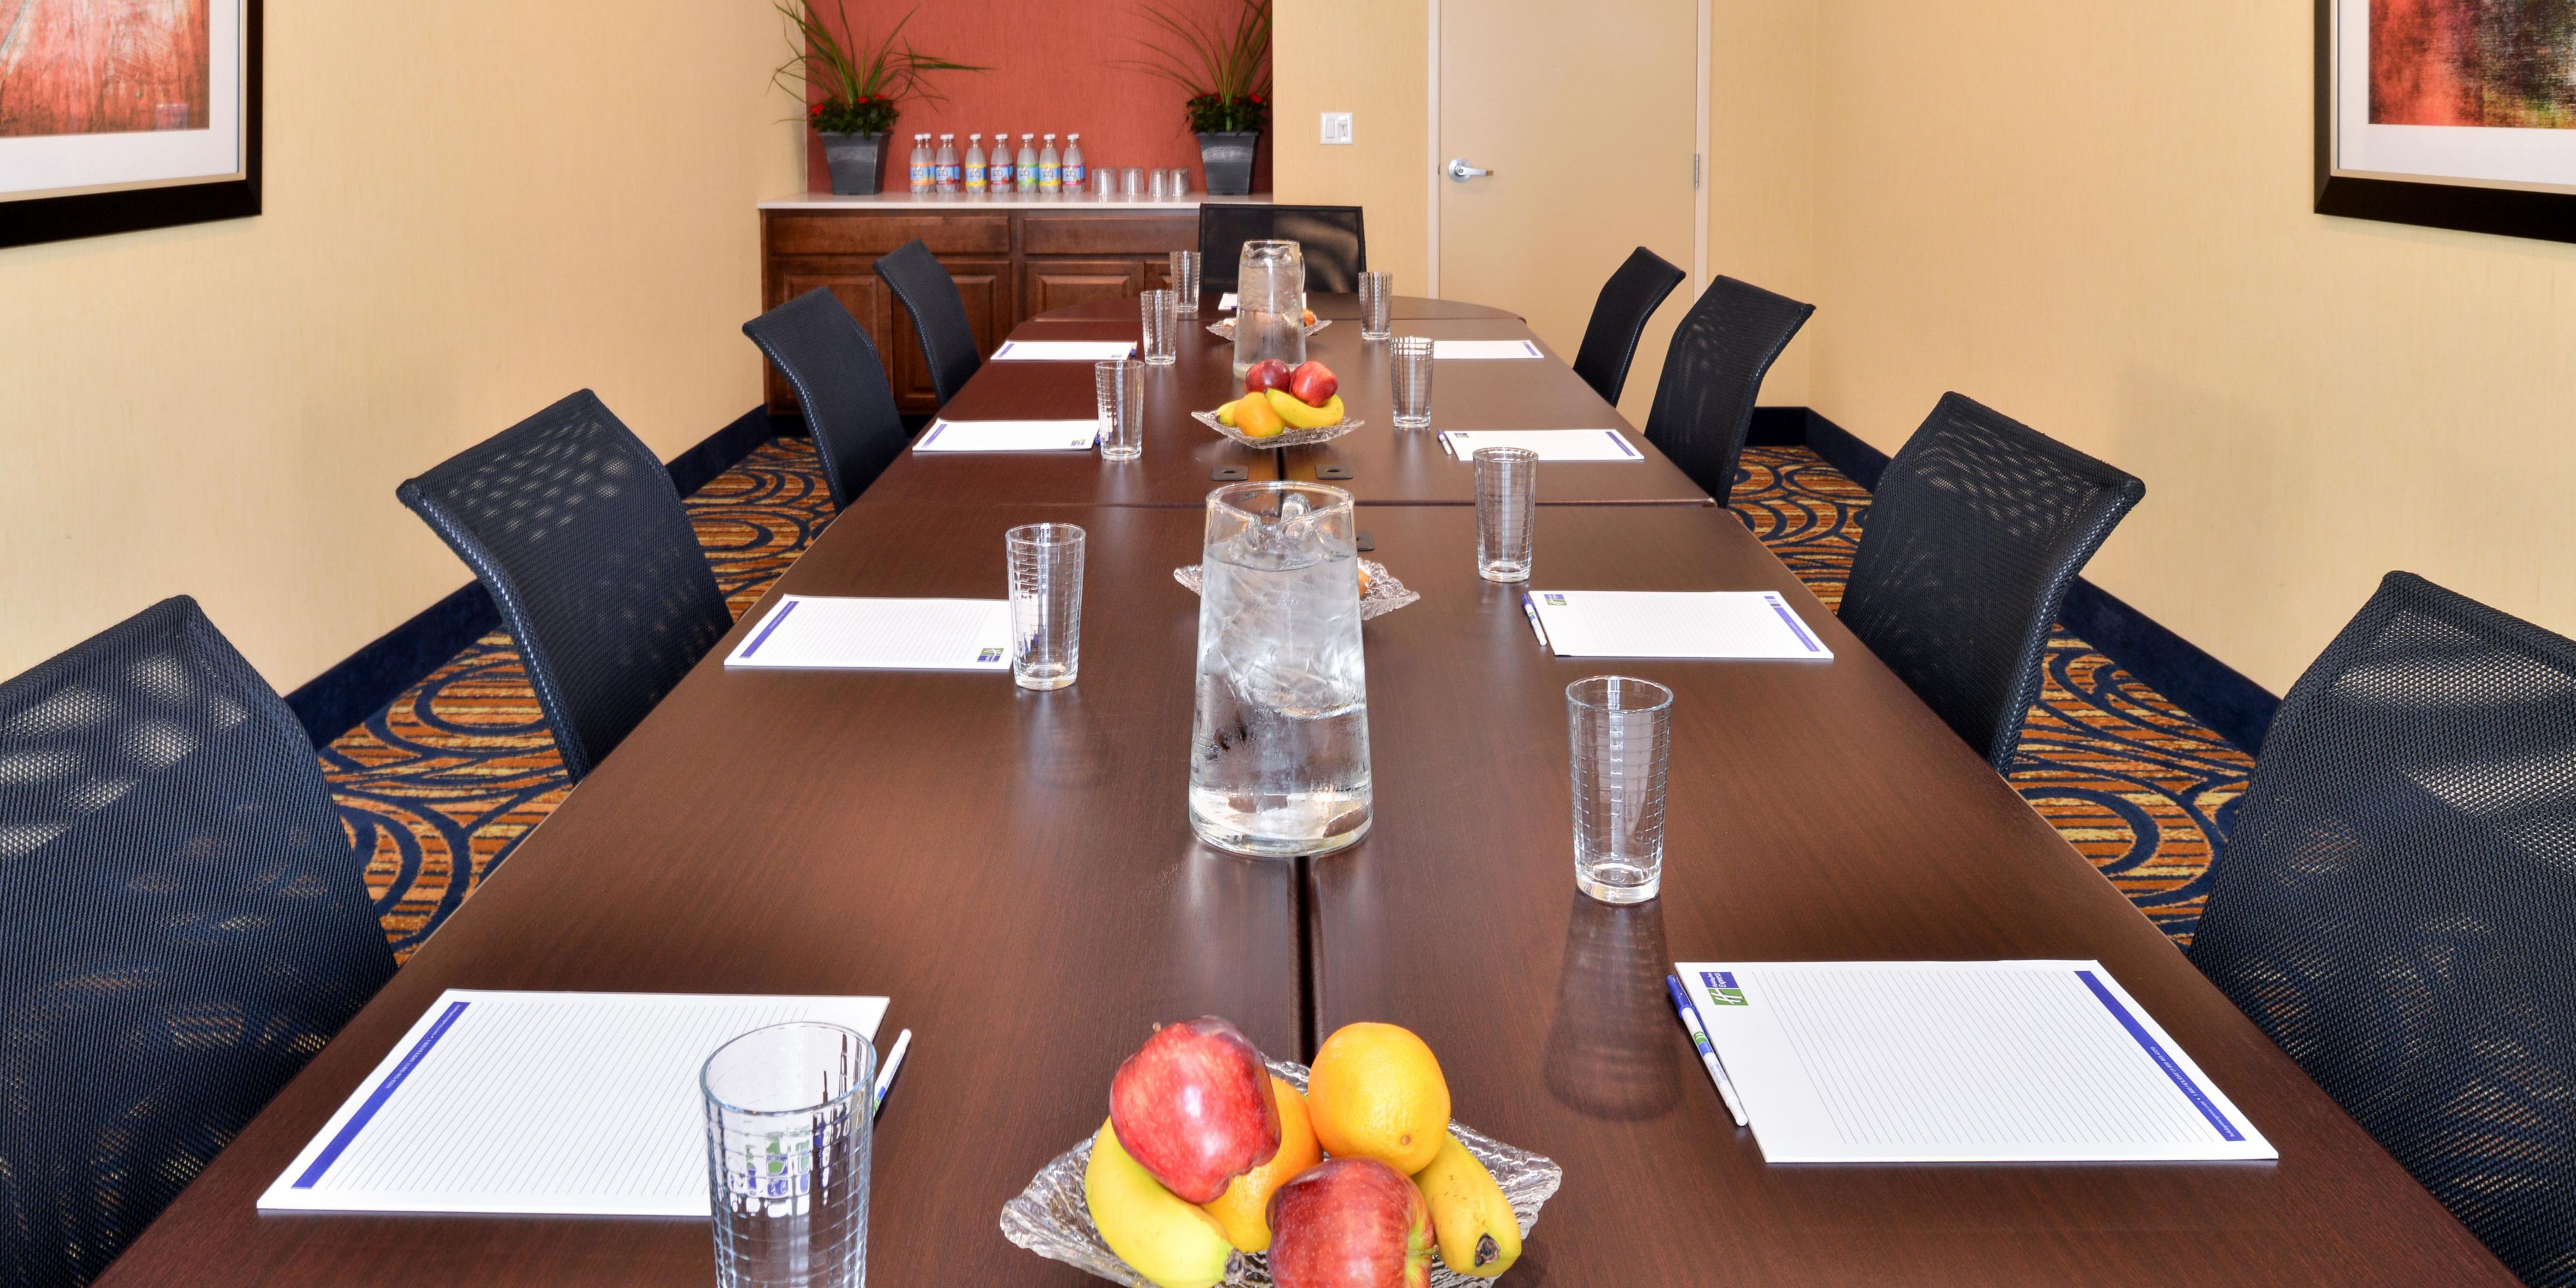 We offer a great location for your meeting room choices! We have two options equaling 1084 Sq Ft of flexible floor plans to meet your requirements for your next function or event. Complimentary water service, Wi-Fi access, free parking, and complimentary projector screen. Call and reserve your next meeting date today!